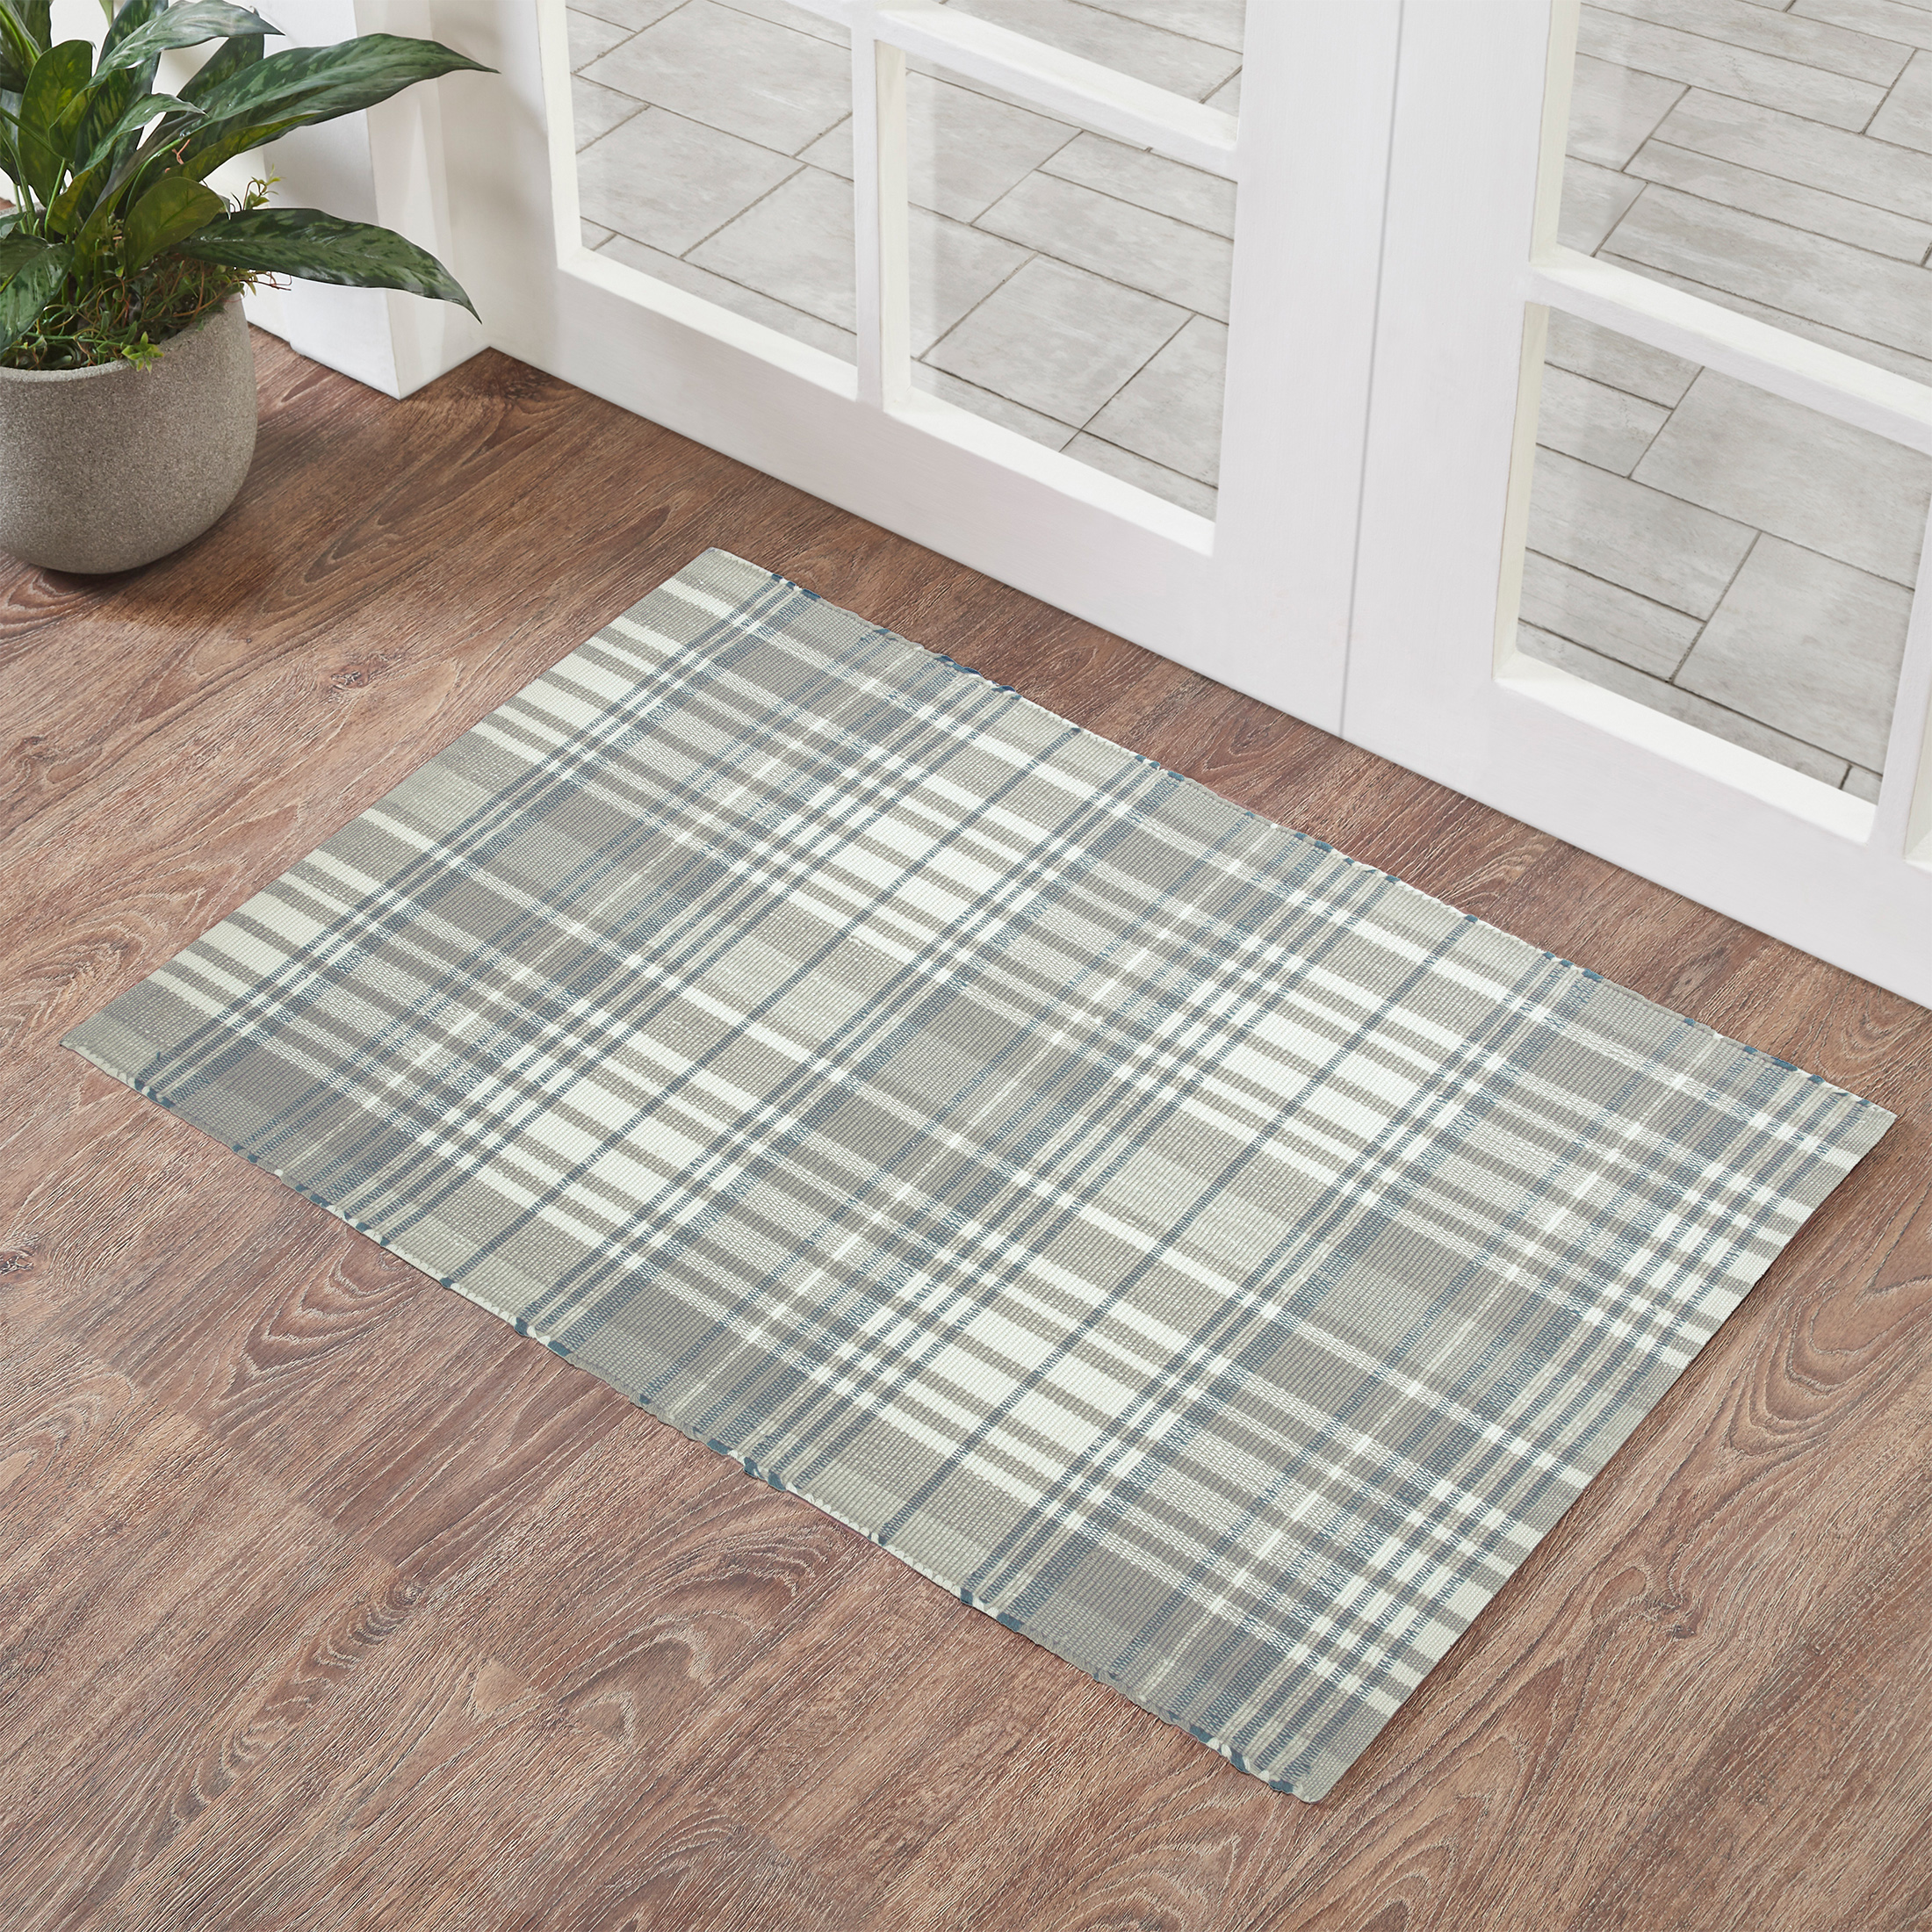 My Texas House Grey Plaid Layering Polyester Indoor/Outdoor Area Rug, 24" x 36" - image 2 of 7